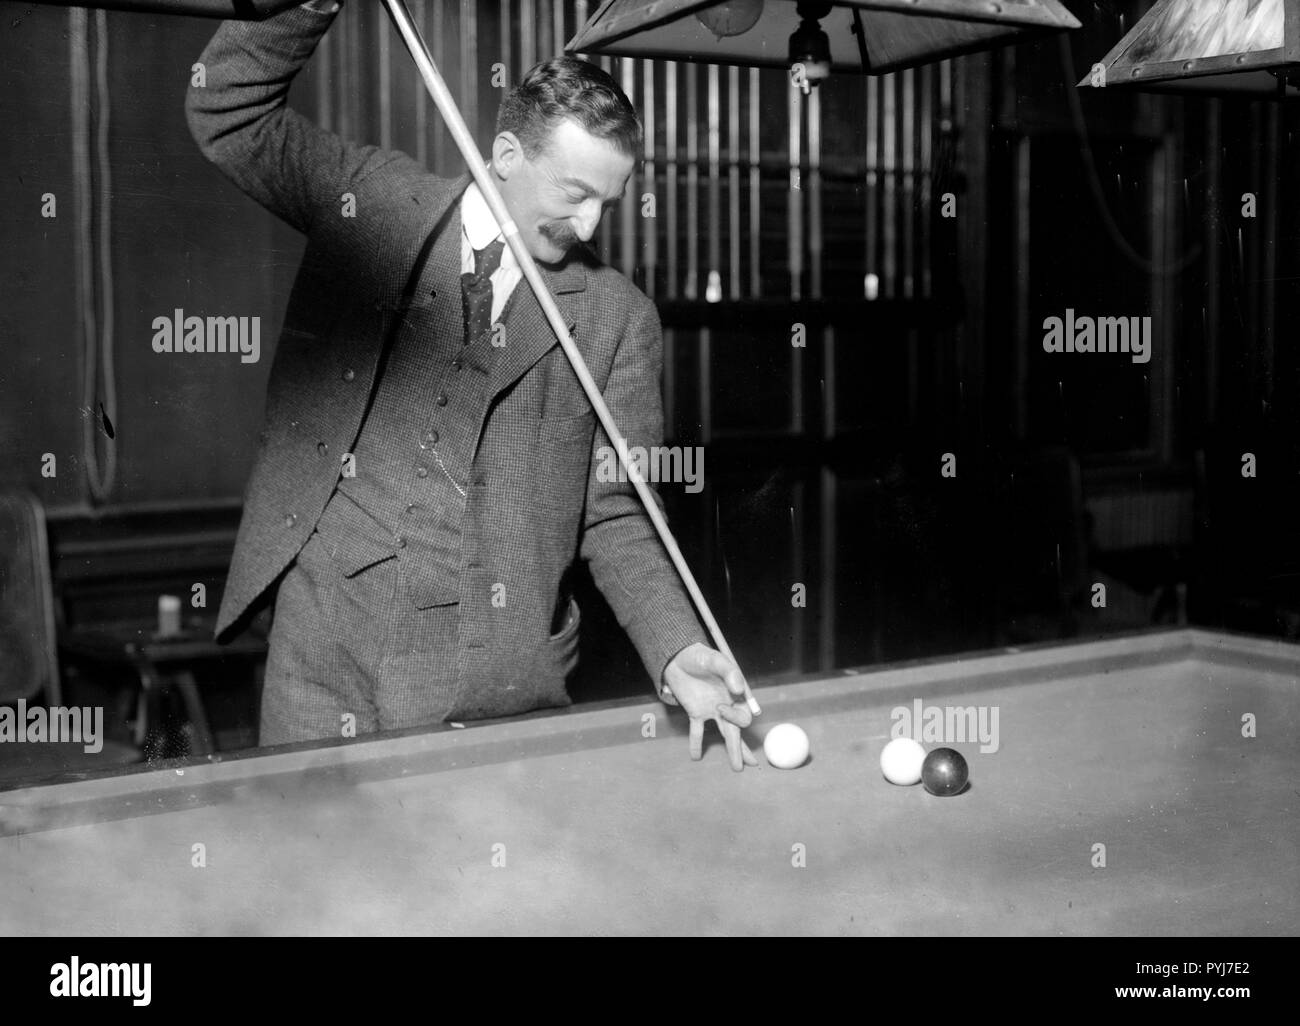 Photo shows Edouard Roudil, French billards player, possibly at championship game with Edward Gardner, reported in New York Times, Feb. 18, 1912. Stock Photo